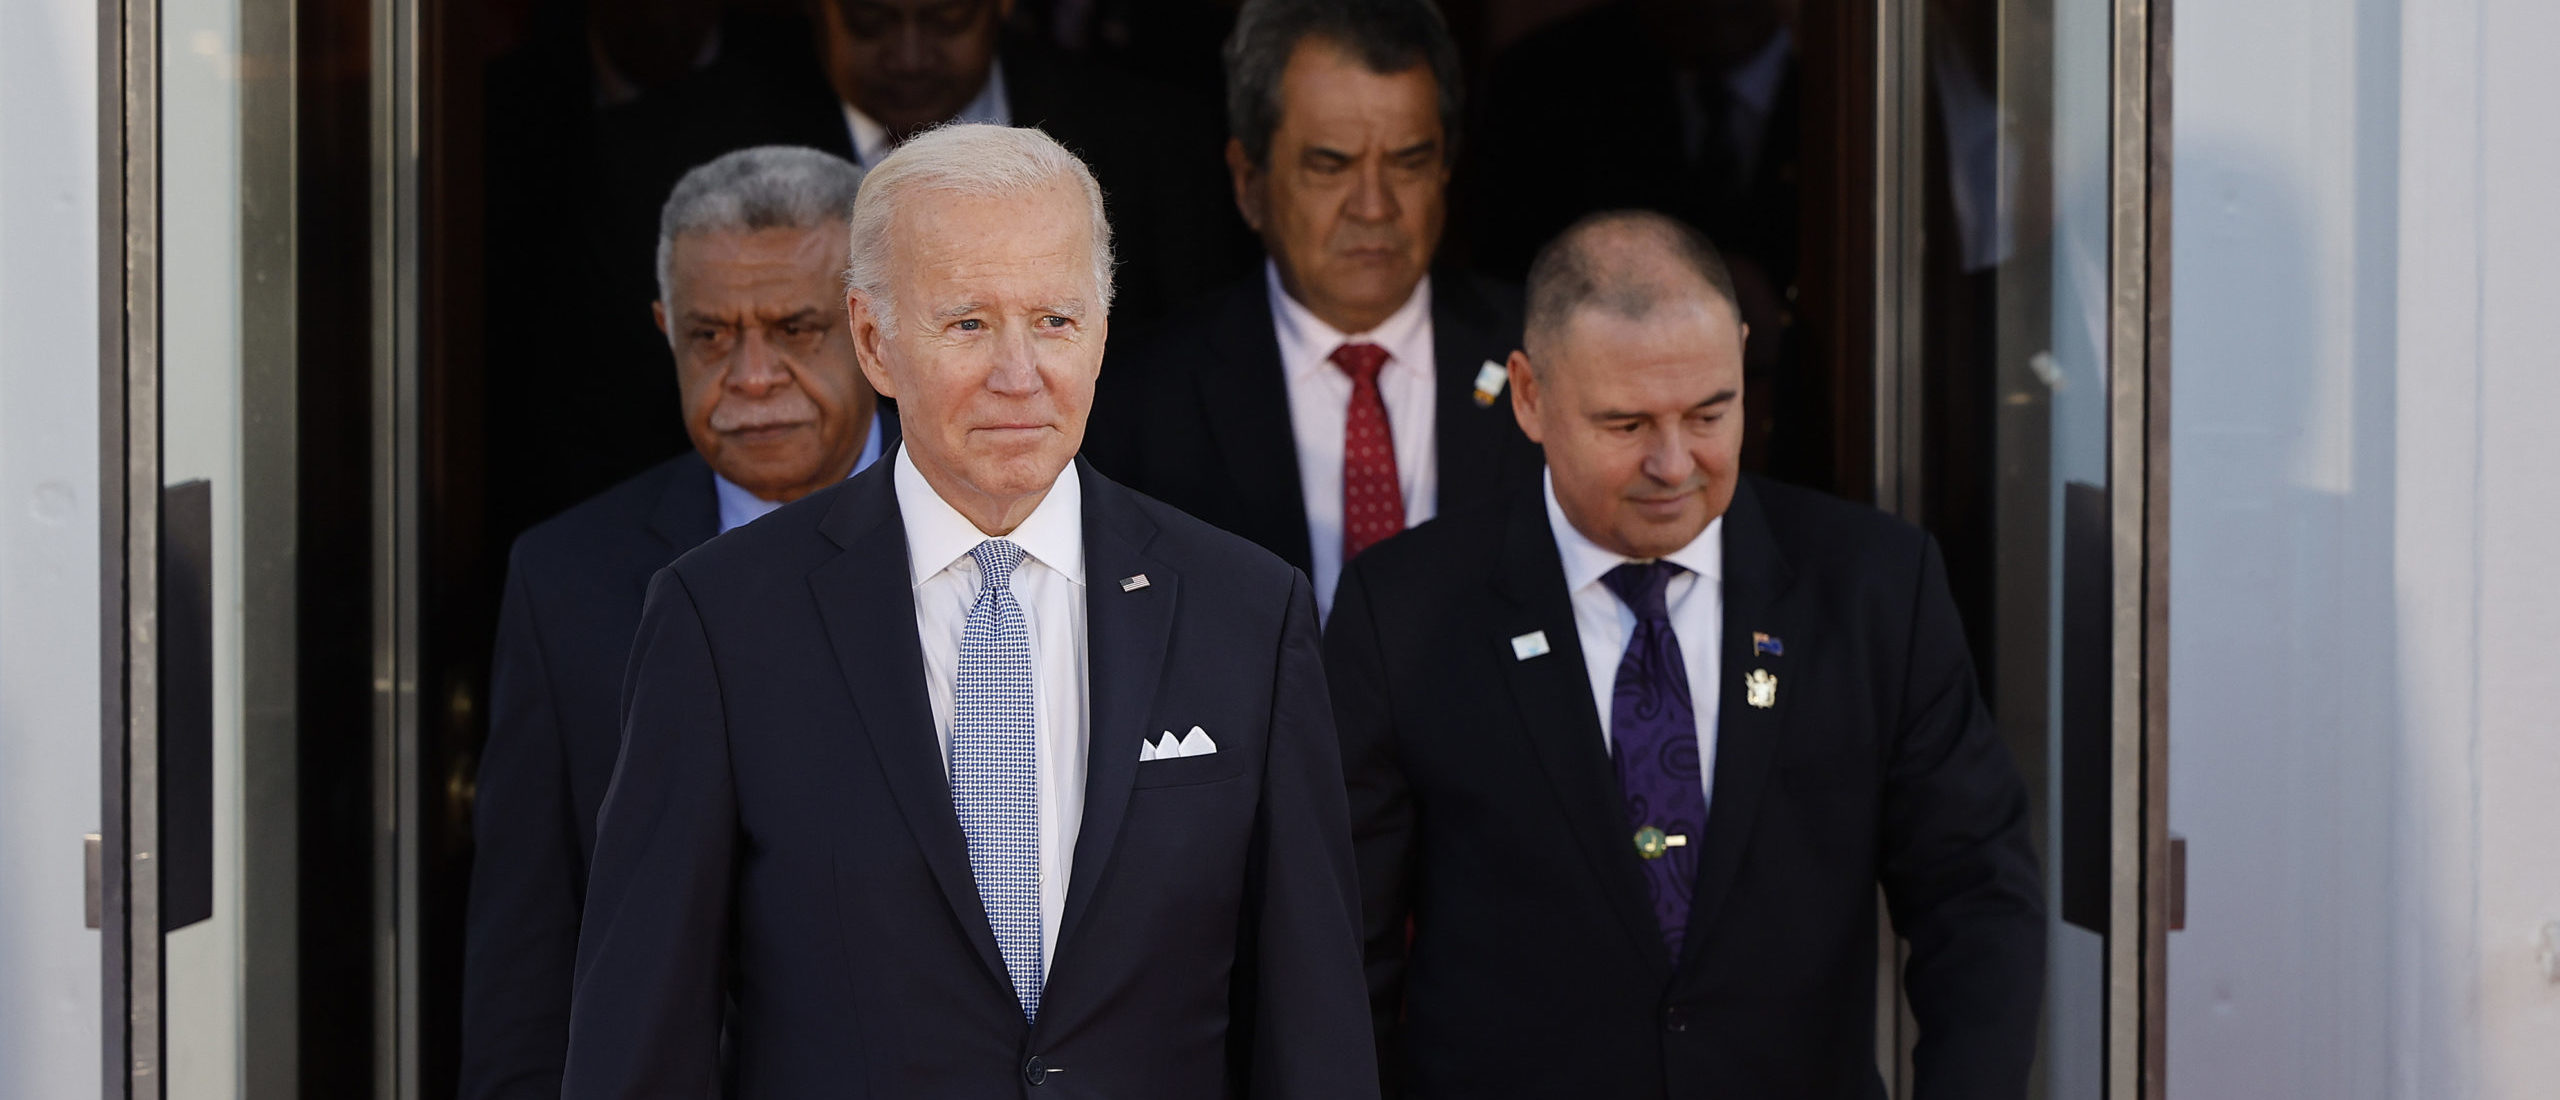 WASHINGTON, DC - SEPTEMBER 29: U.S. President Joe Biden leads a group of leaders from the Pacific Islands region onto the North Portico for a group photograph at the White House September 29, 2022 in Washington, DC. (Photo by Chip Somodevilla/Getty Images)